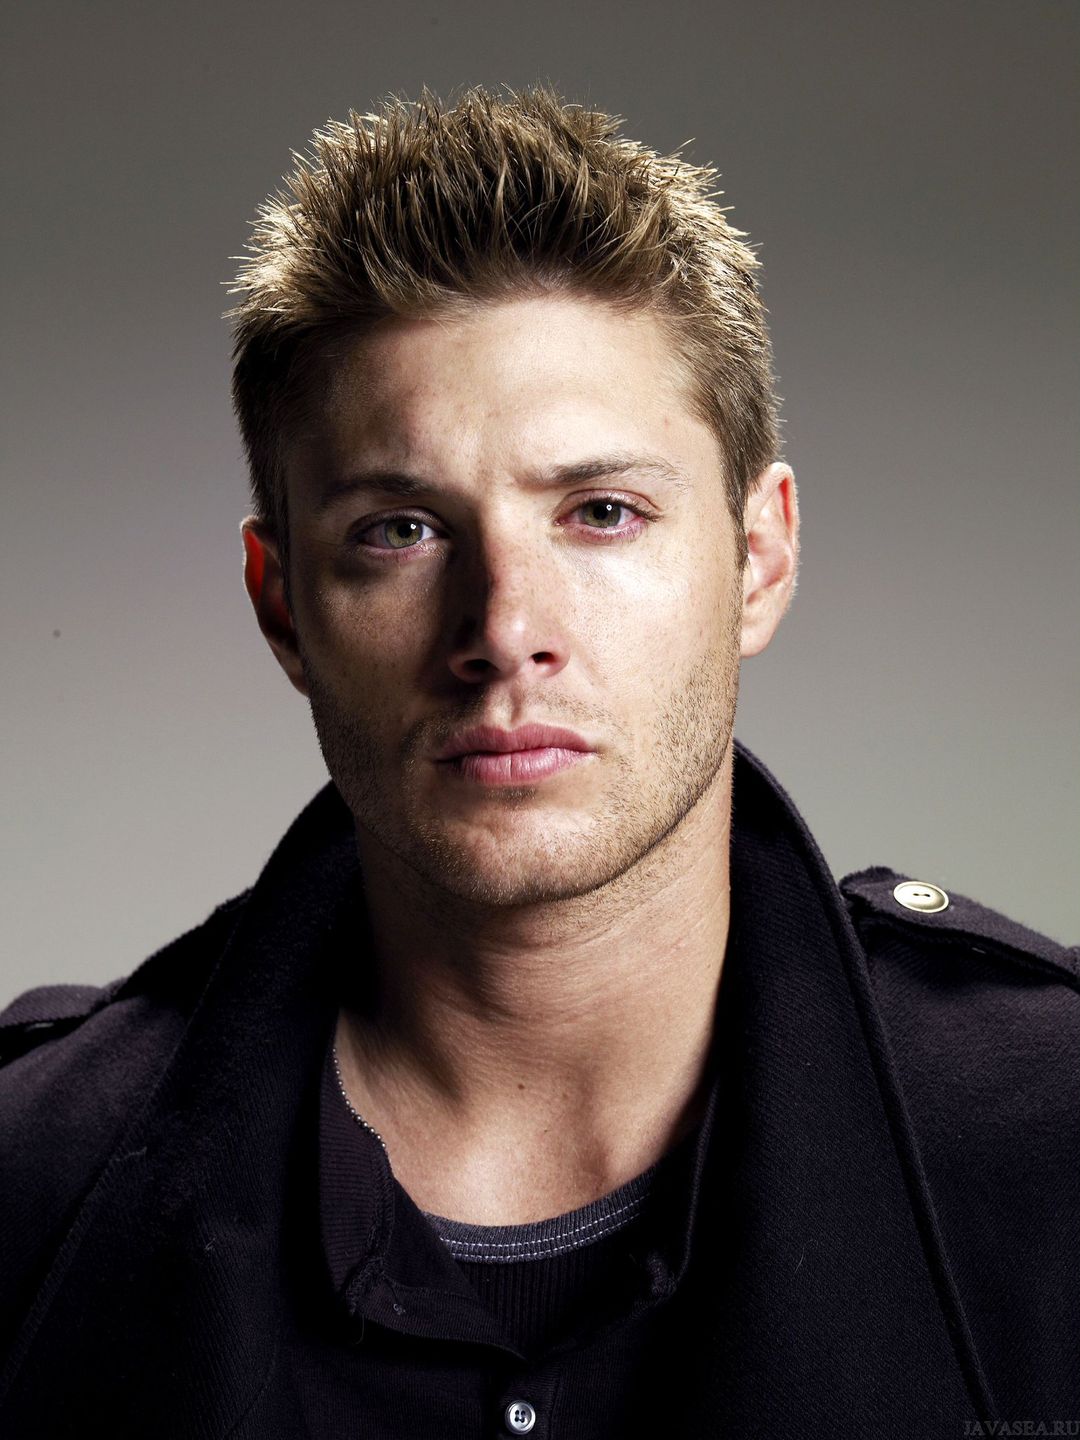 Jensen Ackles does he have a wife